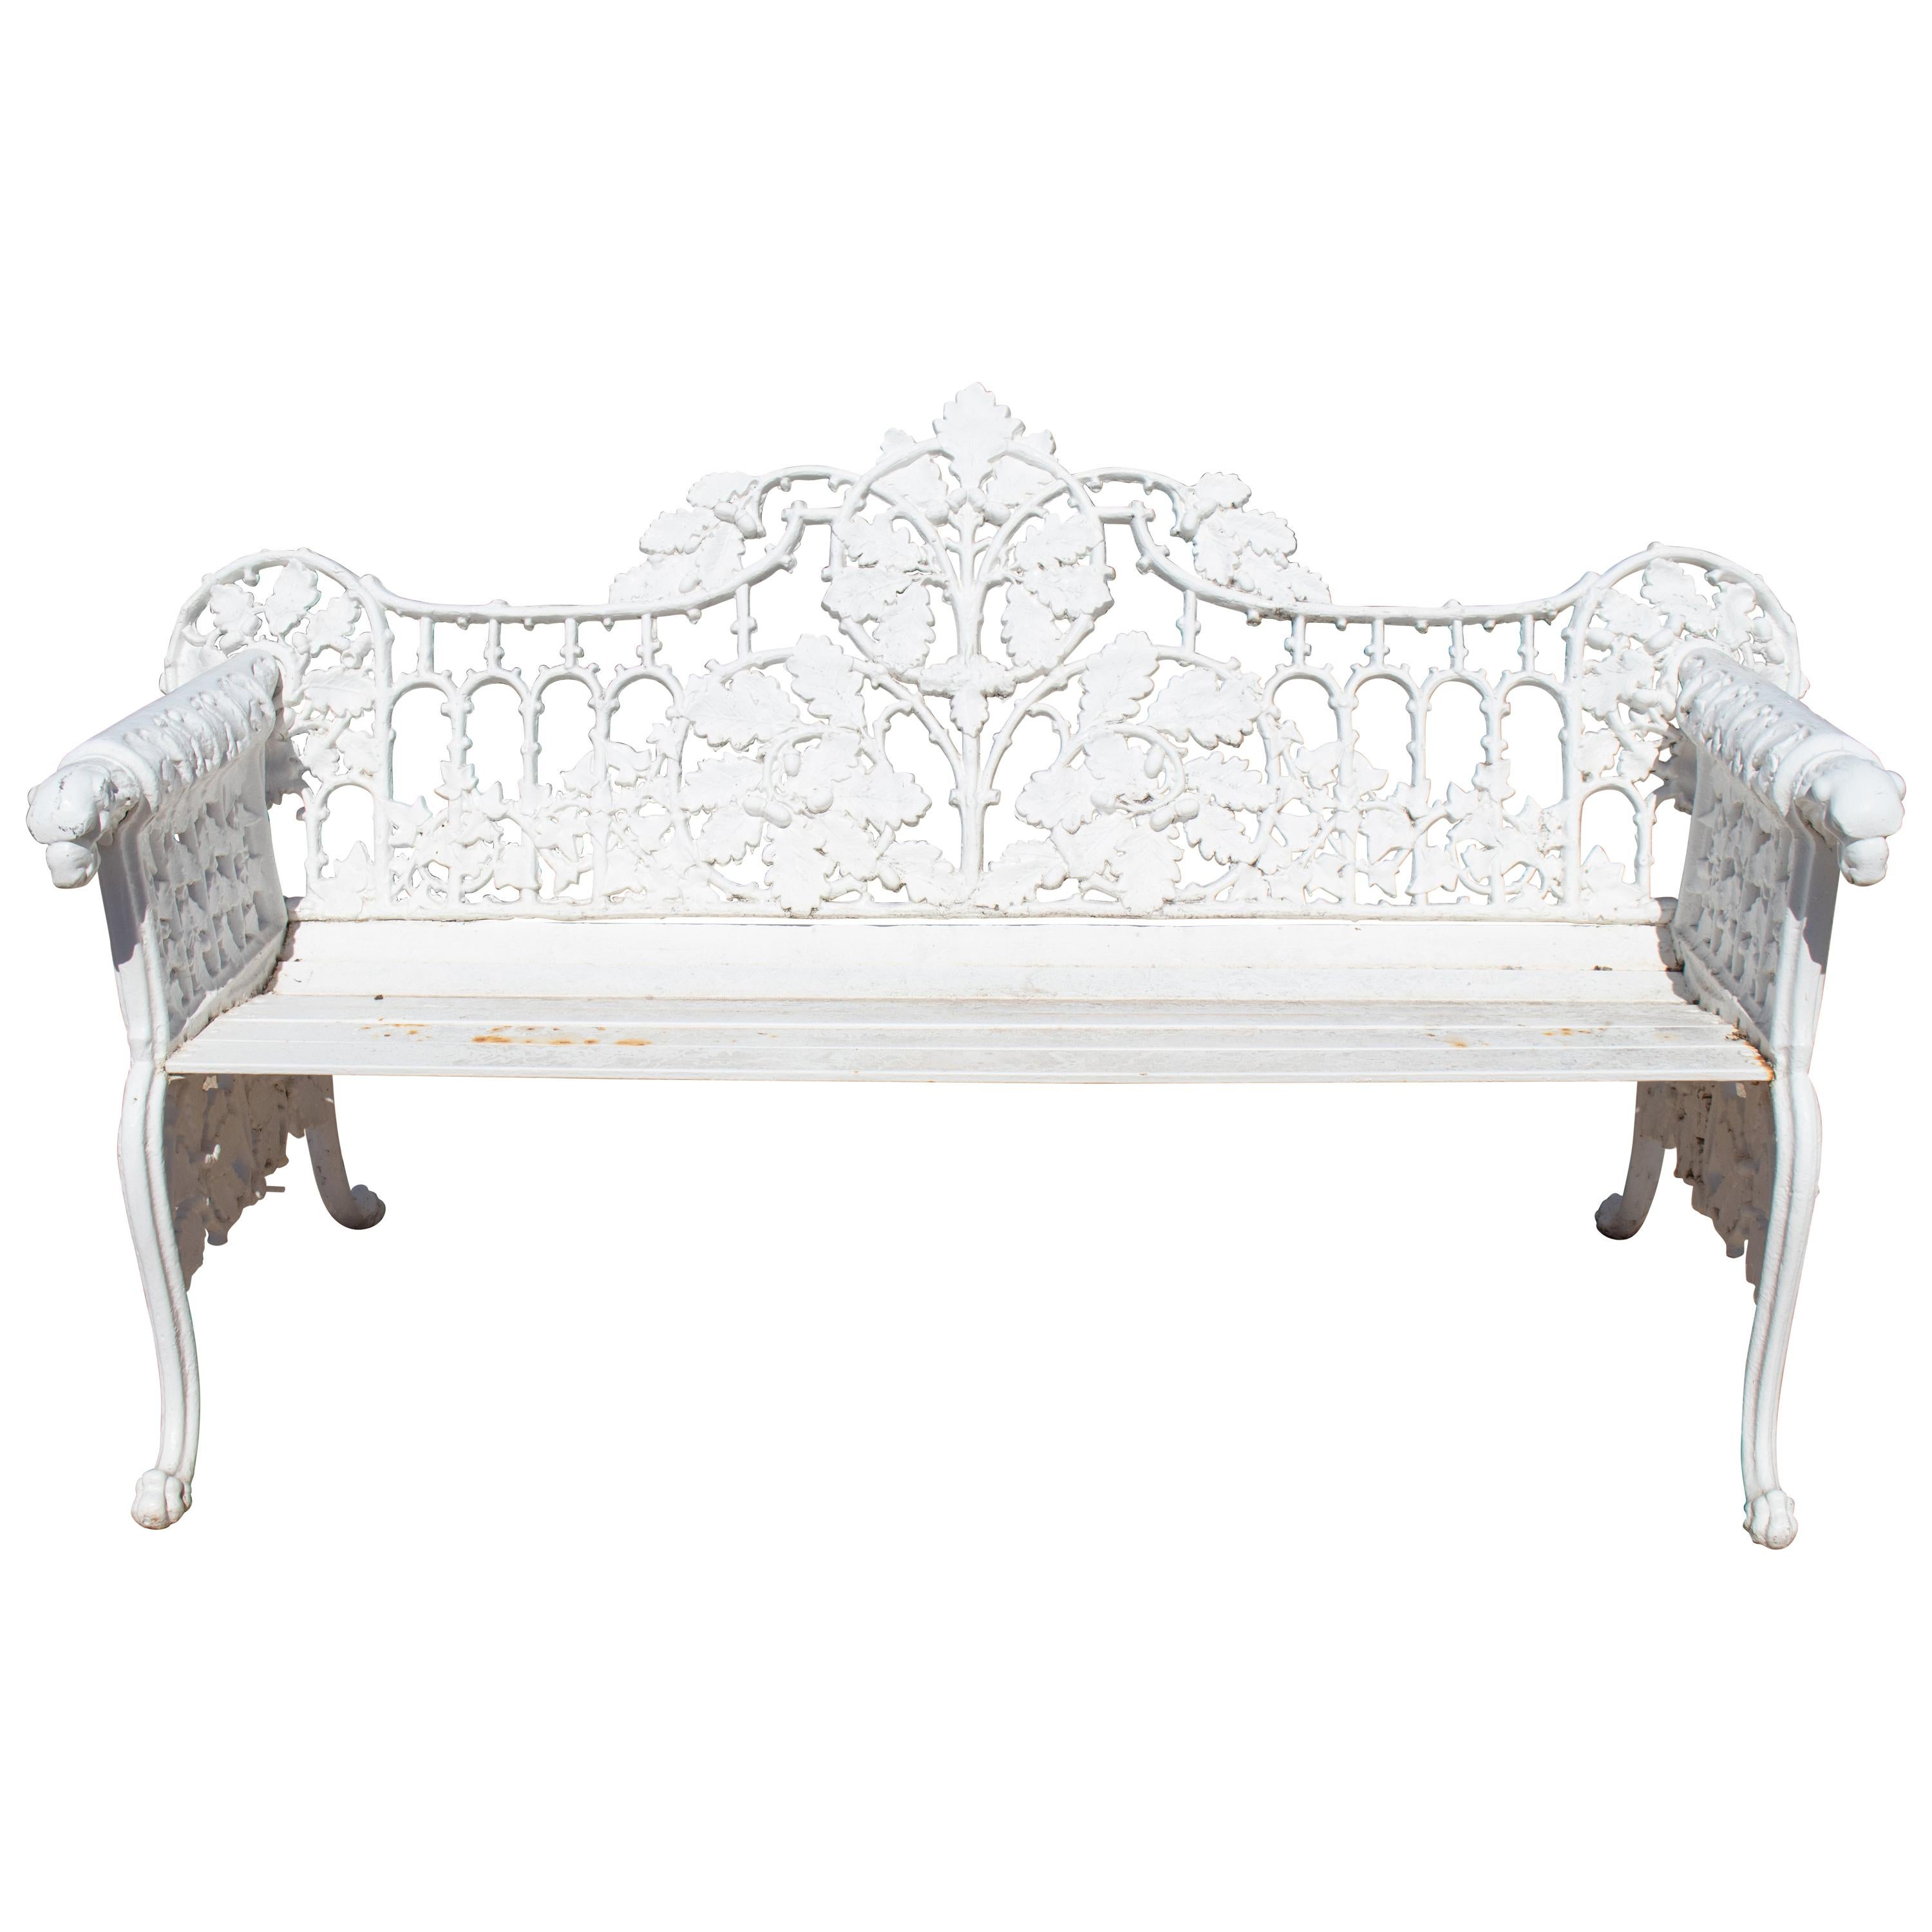 1980s Cast Aluminium Solid Metal White Garden Bench with Grapes Flower Garlands